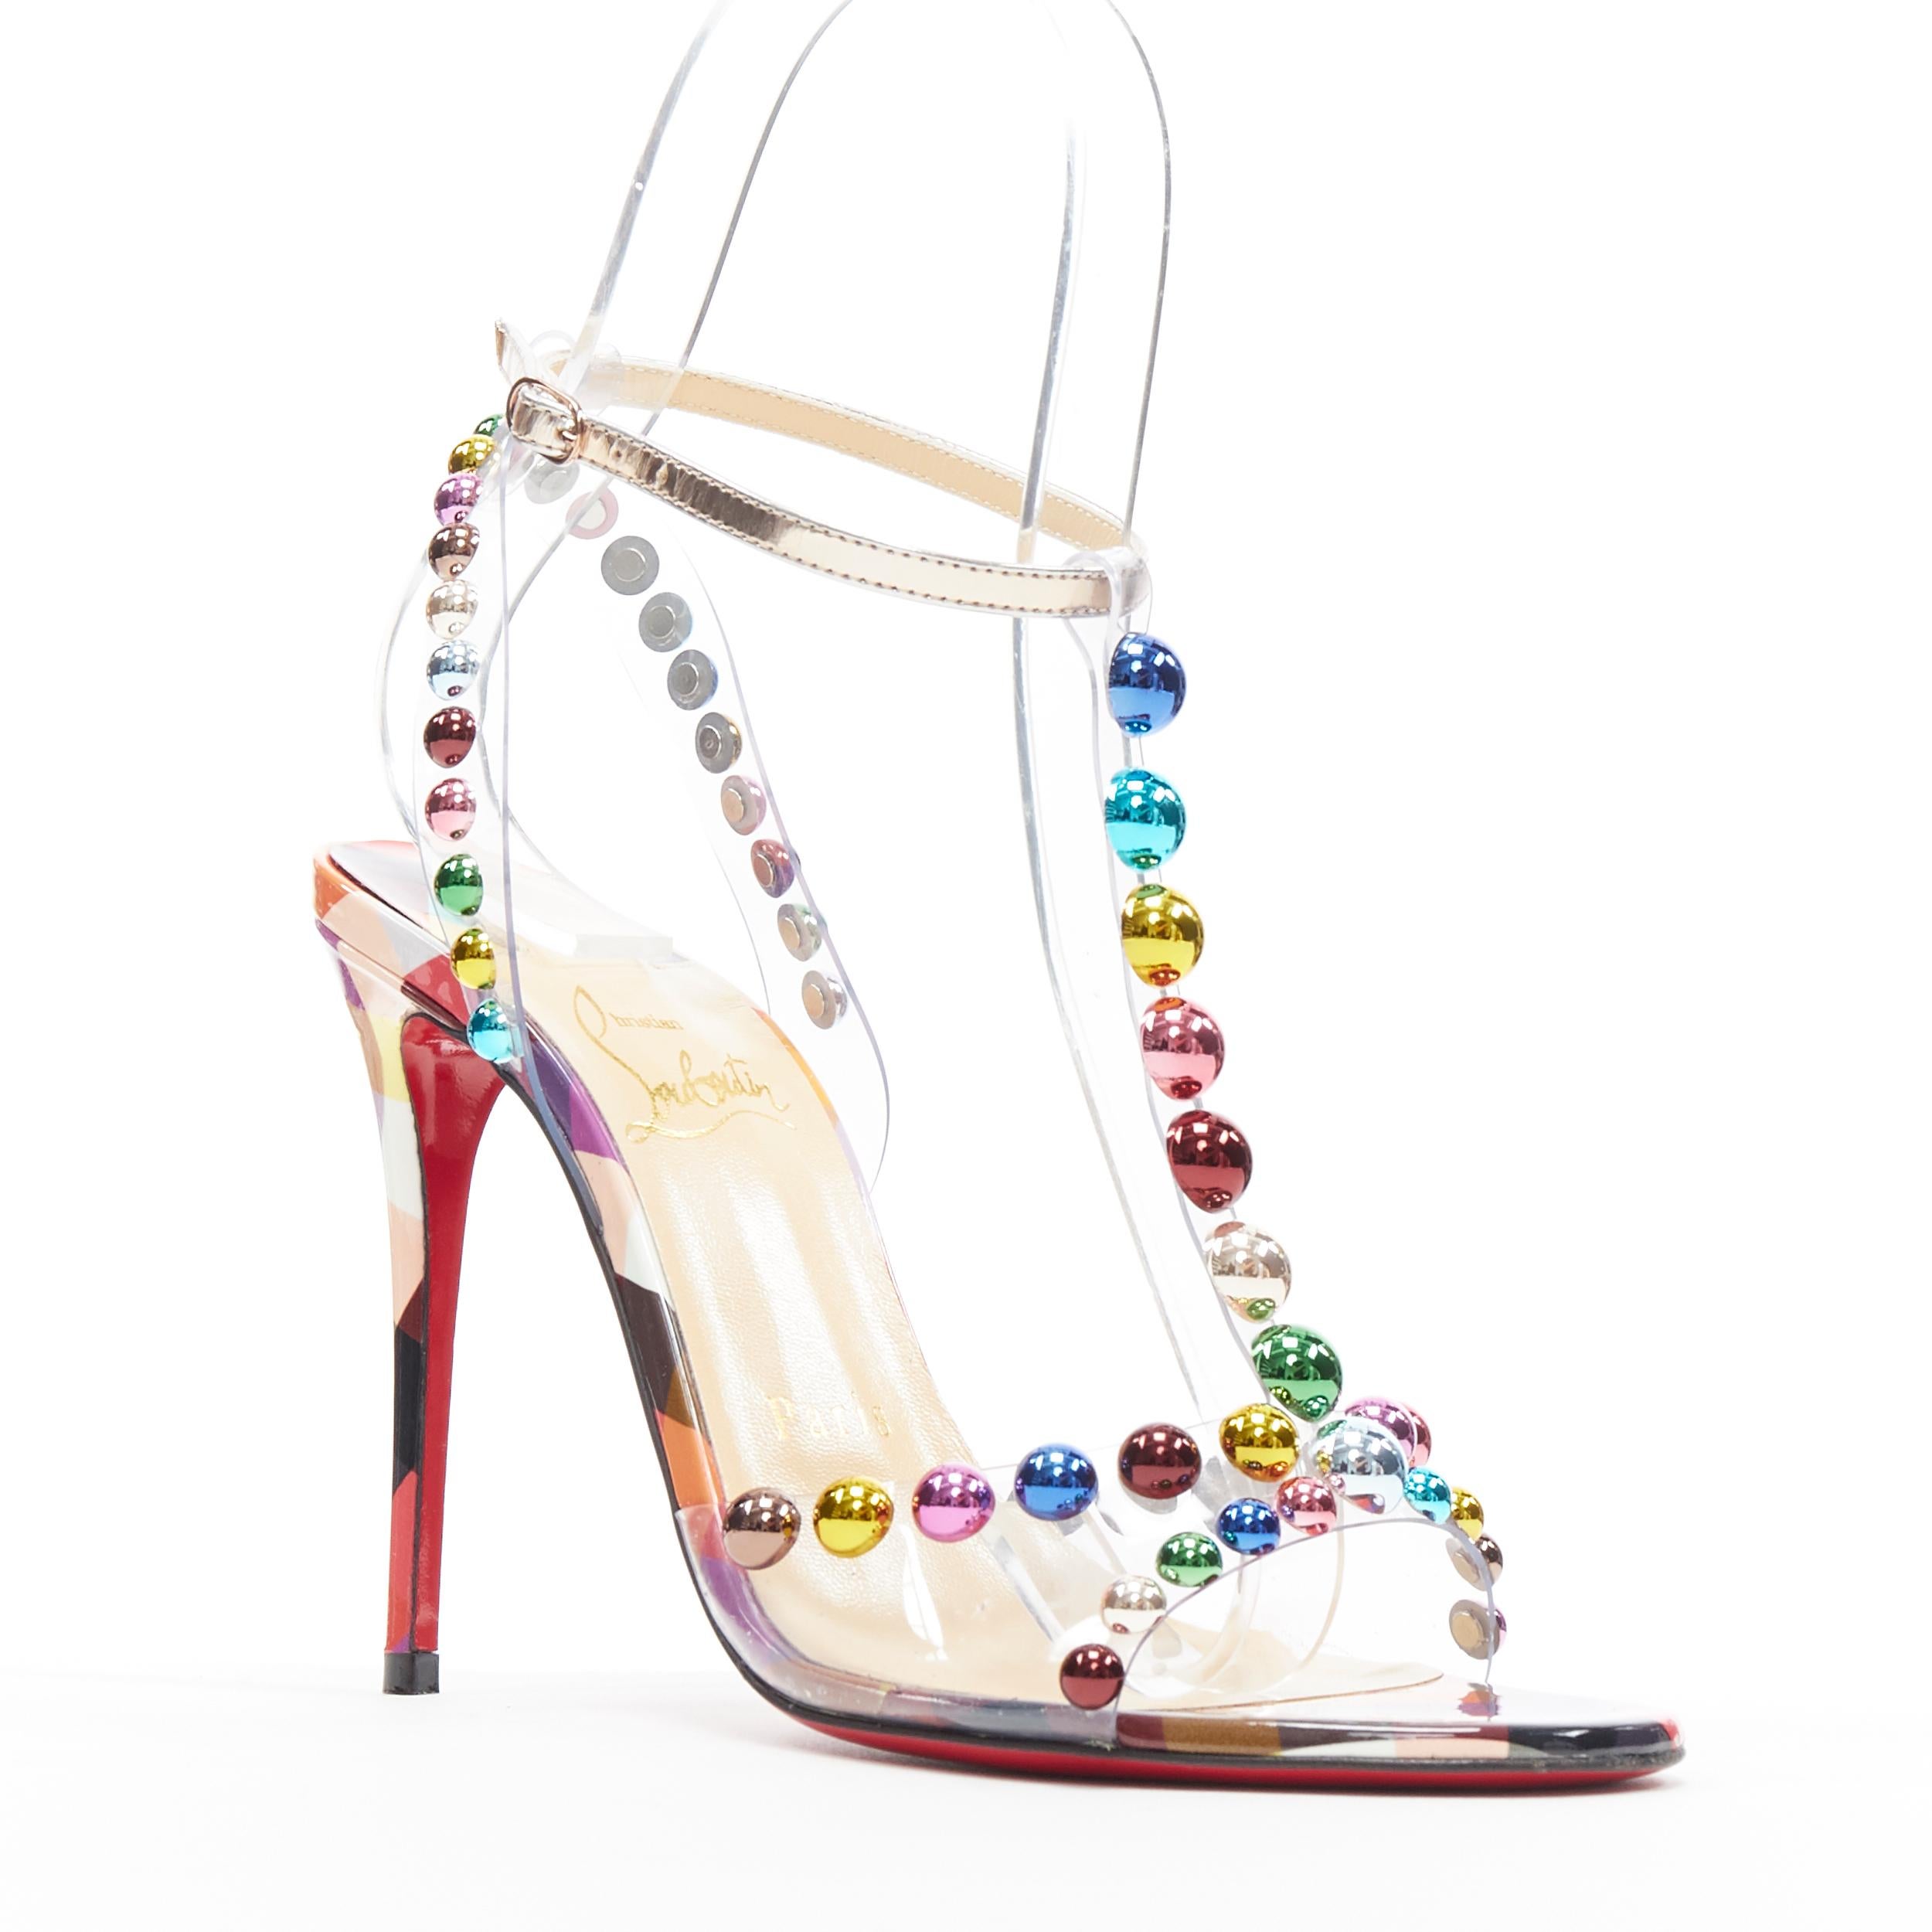 new CHRISTIAN LOUBOUTIN Faridaravie 100 metallic ball stud PVC strappy EU36.5
Brand: Christian Louboutin
Designer: Christian Louboutin
Model Name / Style: Faridaravie 100
Material: PVC
Color: Multicolour
Pattern: Solid
Closure: Ankle strap
Extra